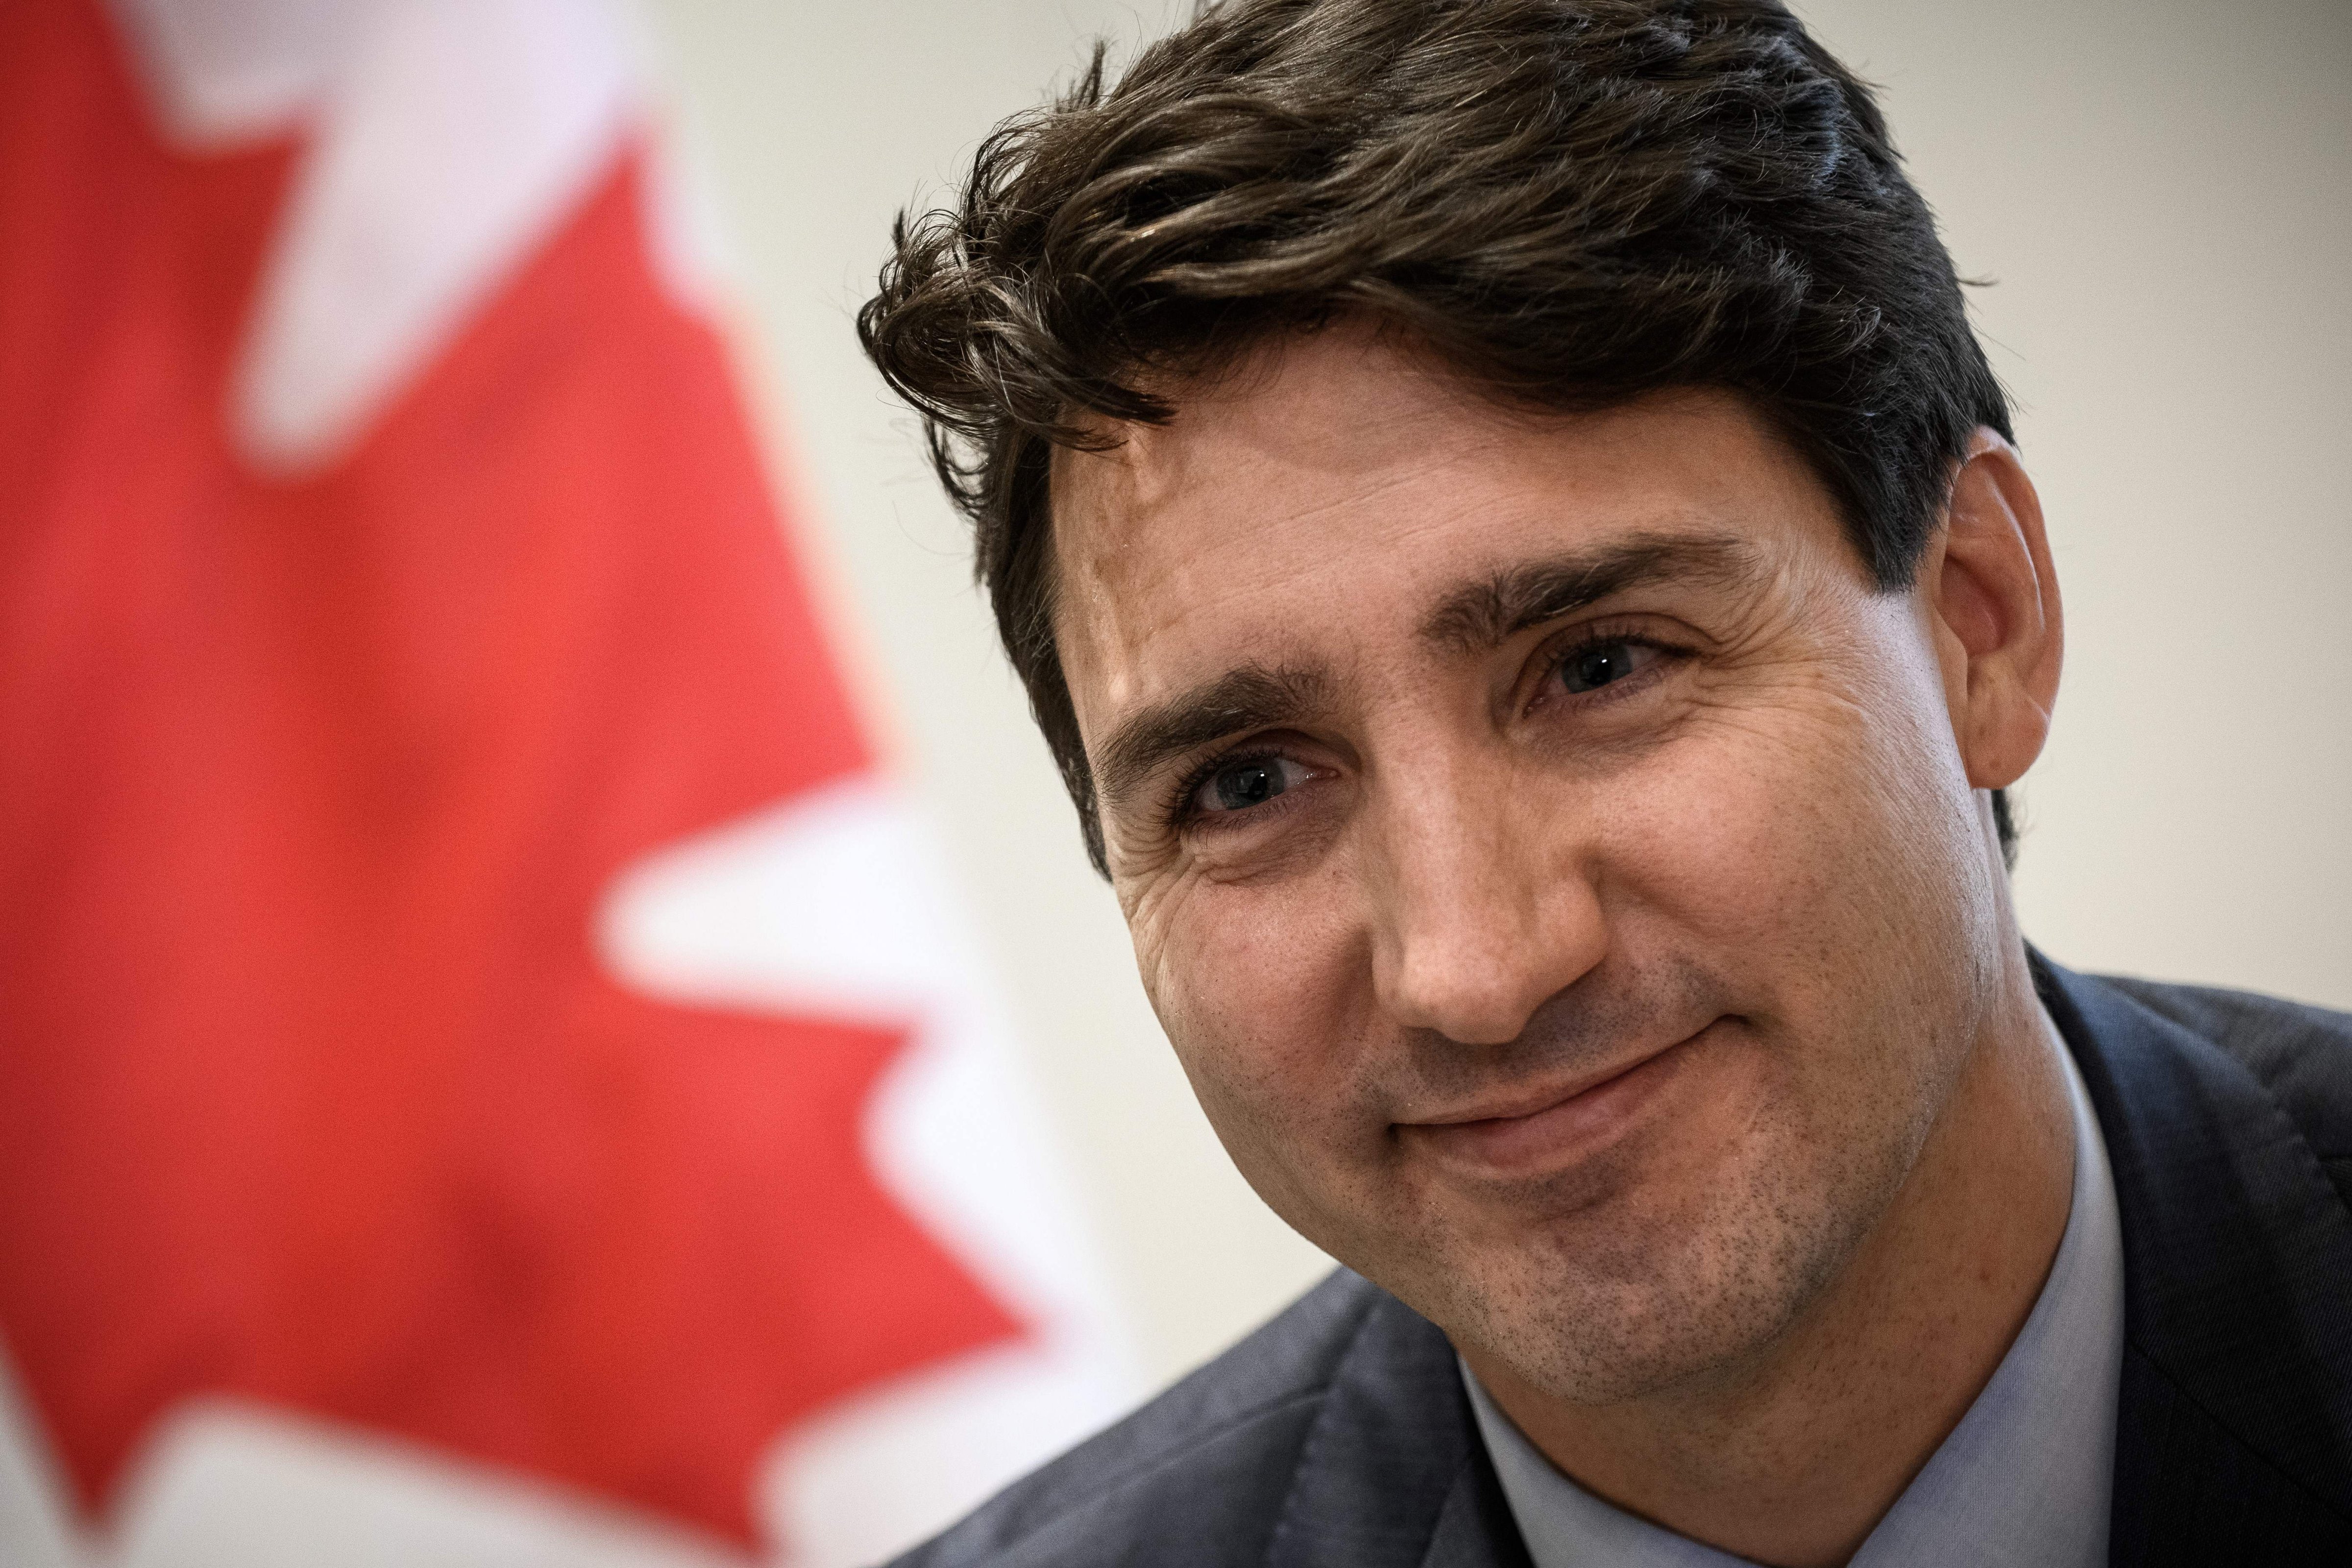 Canadian Prime Minister Justin Trudeau gives an interview at the Canadian Embassy in Paris on Nov. 12, 2018. (Philippe Lopez&mdash;AFP/Getty Images)